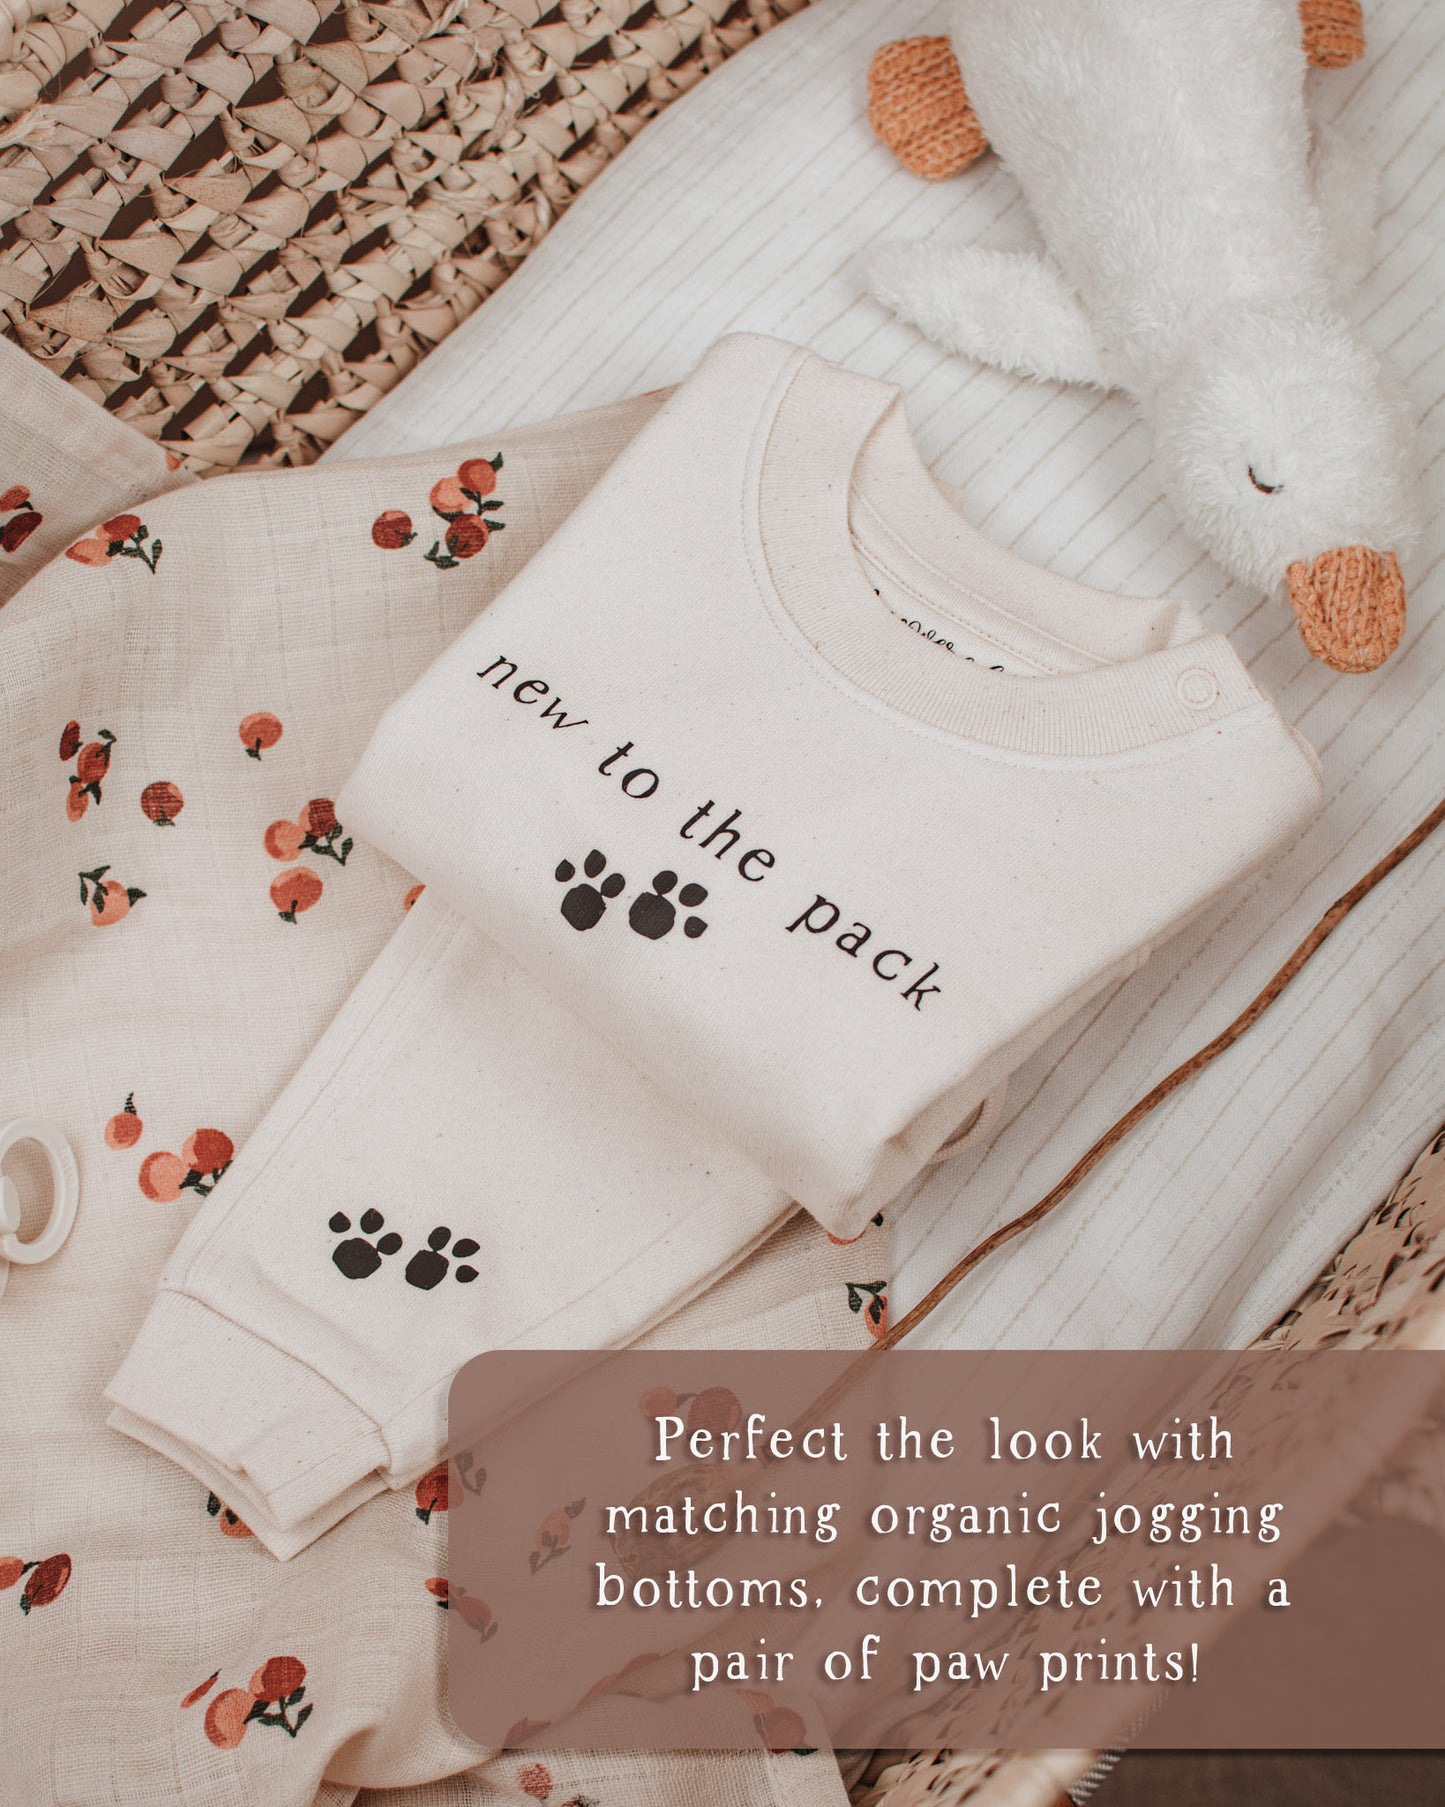 A Puppy Would Have Been Easier - Baby Sweatshirt